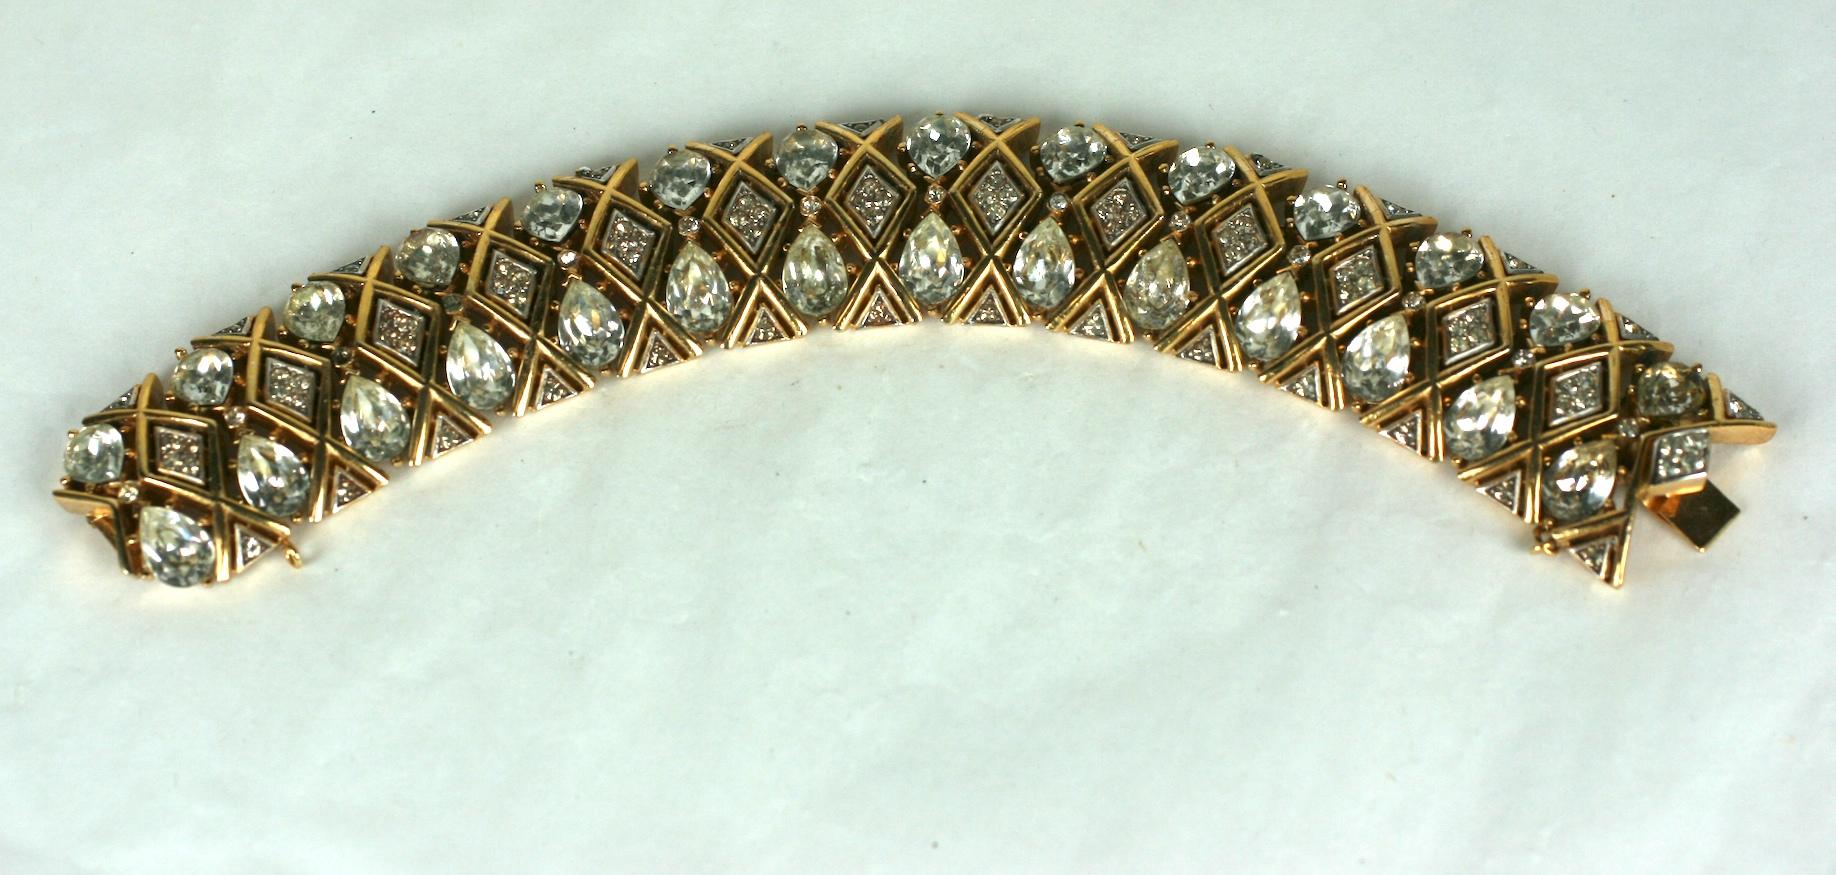 Trifari Glamour Rhinestone Bracelet set with large pear shaped crystals with pave accents. Very flexible and comfortable articulated construction set in gilt metal.  1960's USA. 
7.5